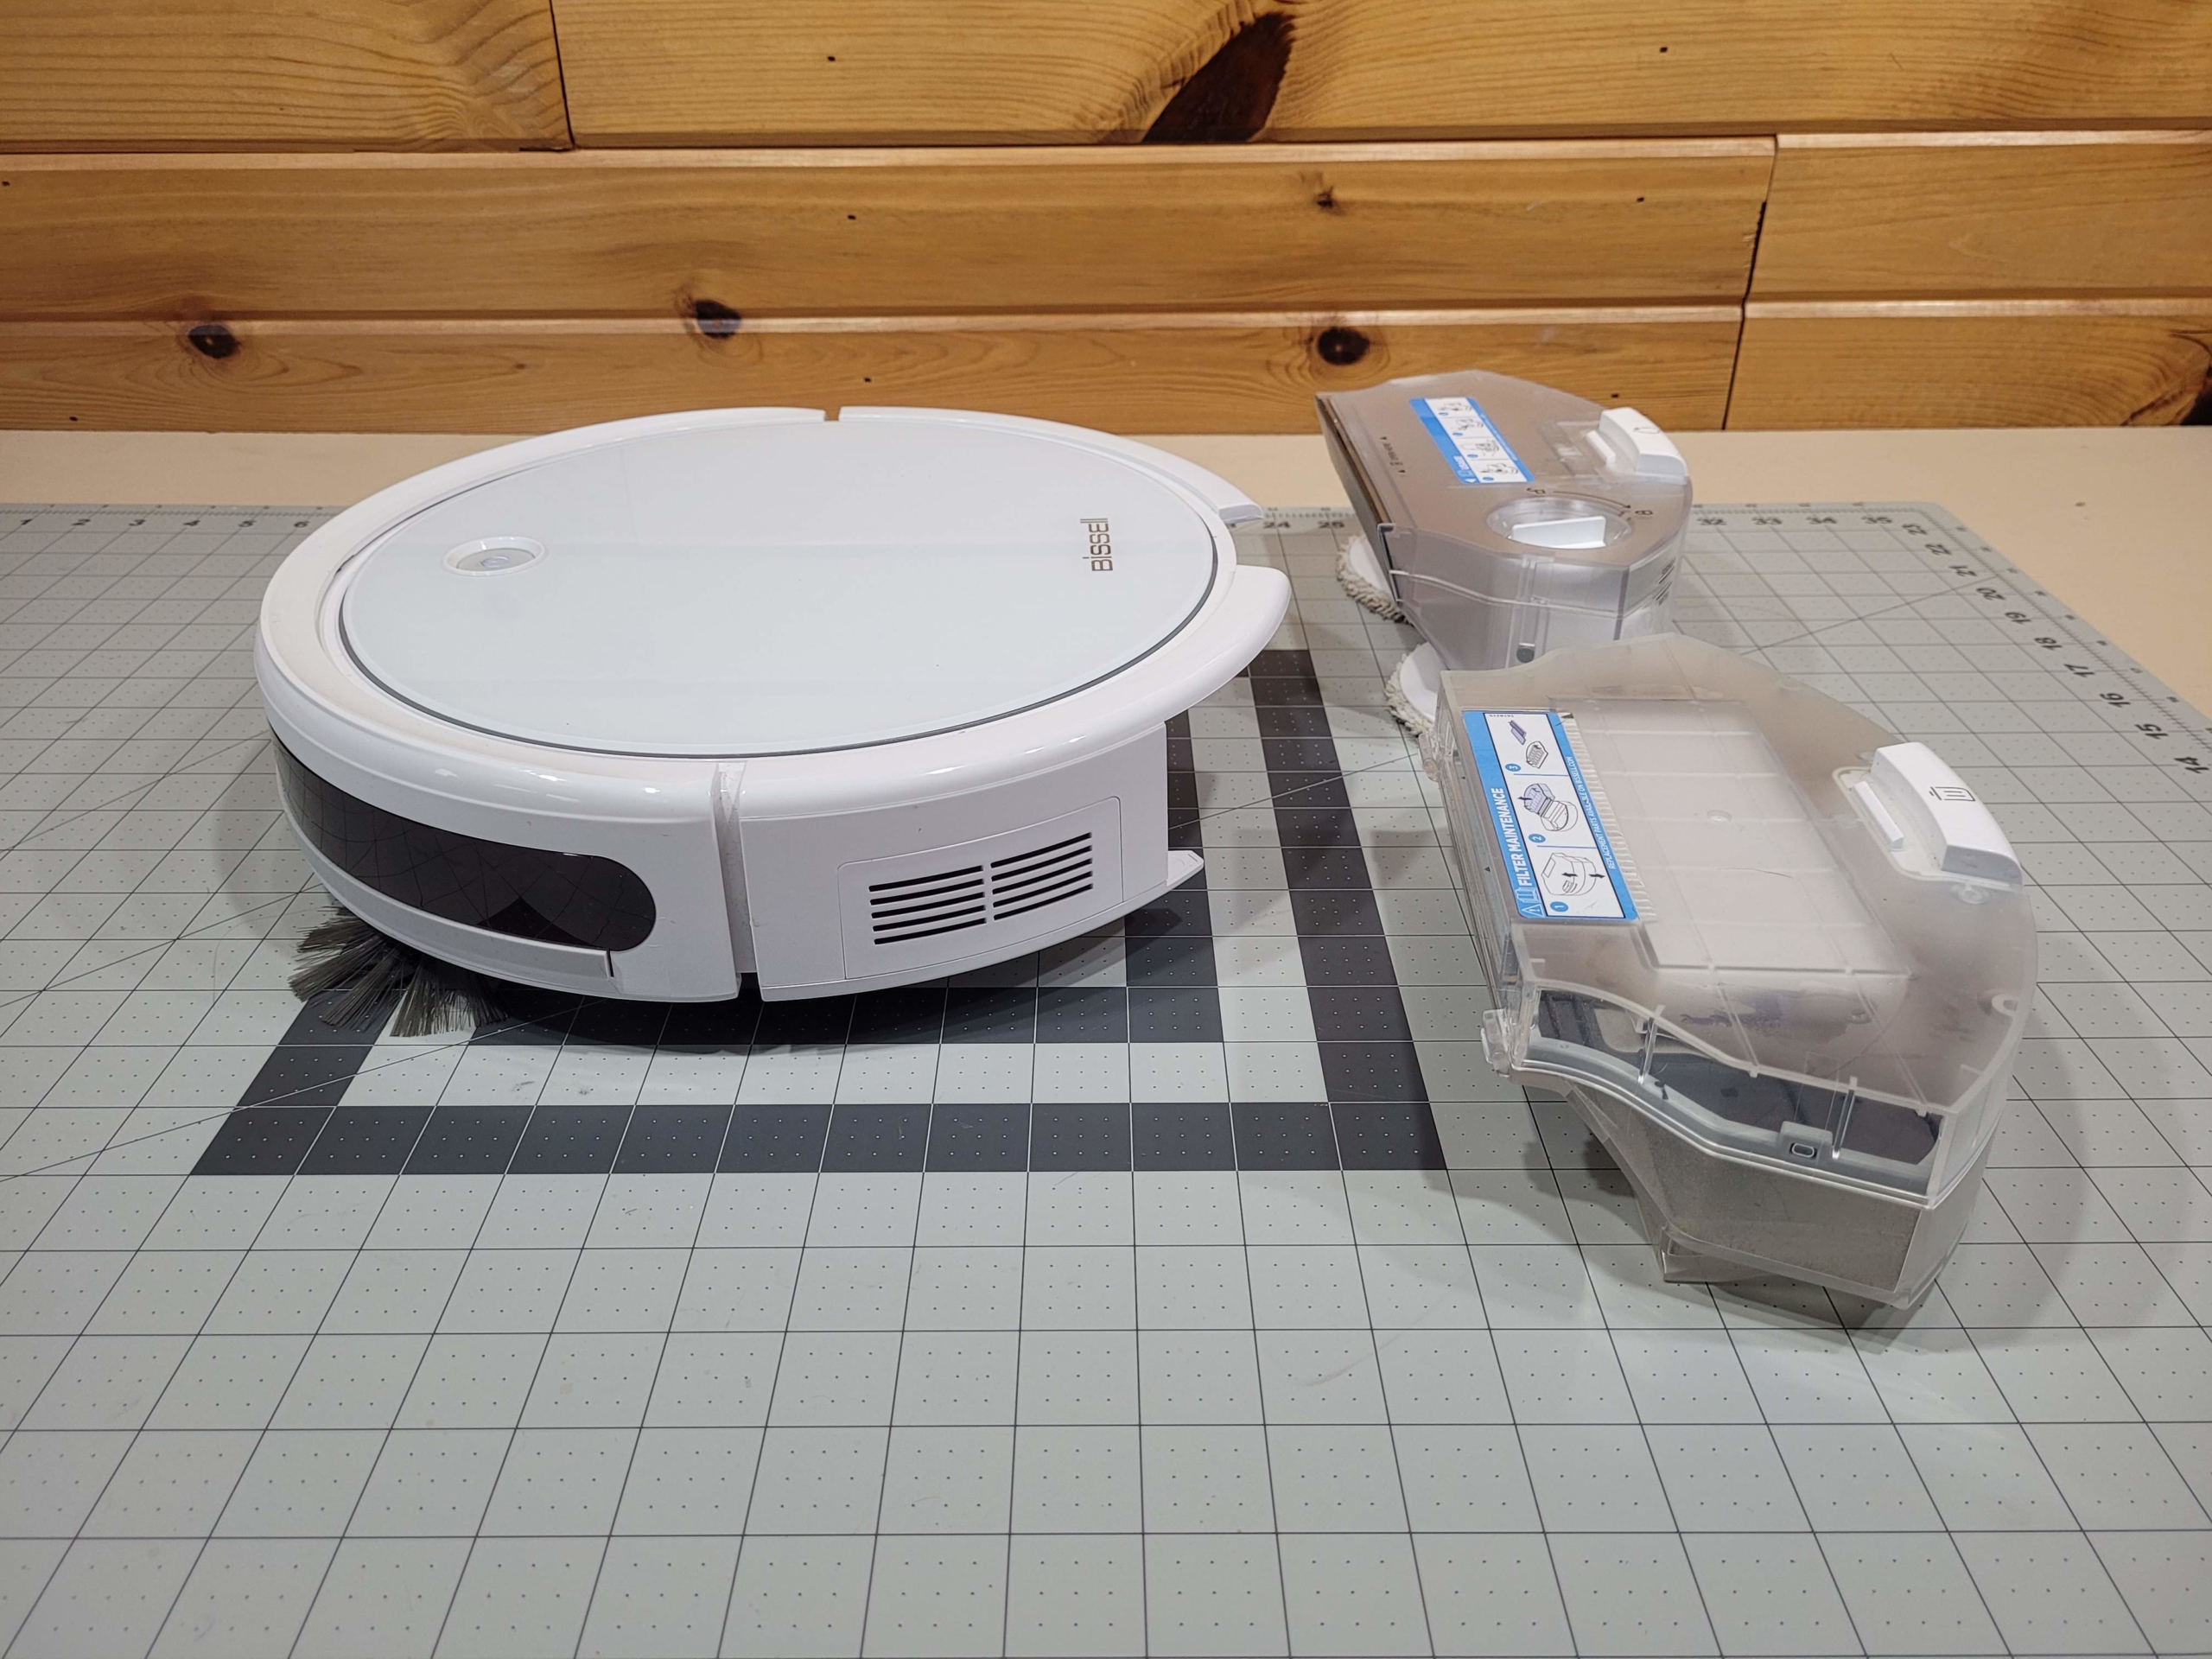 Bissell SpinWave Robot Vacuum: A Basic Bot That Cleans Well